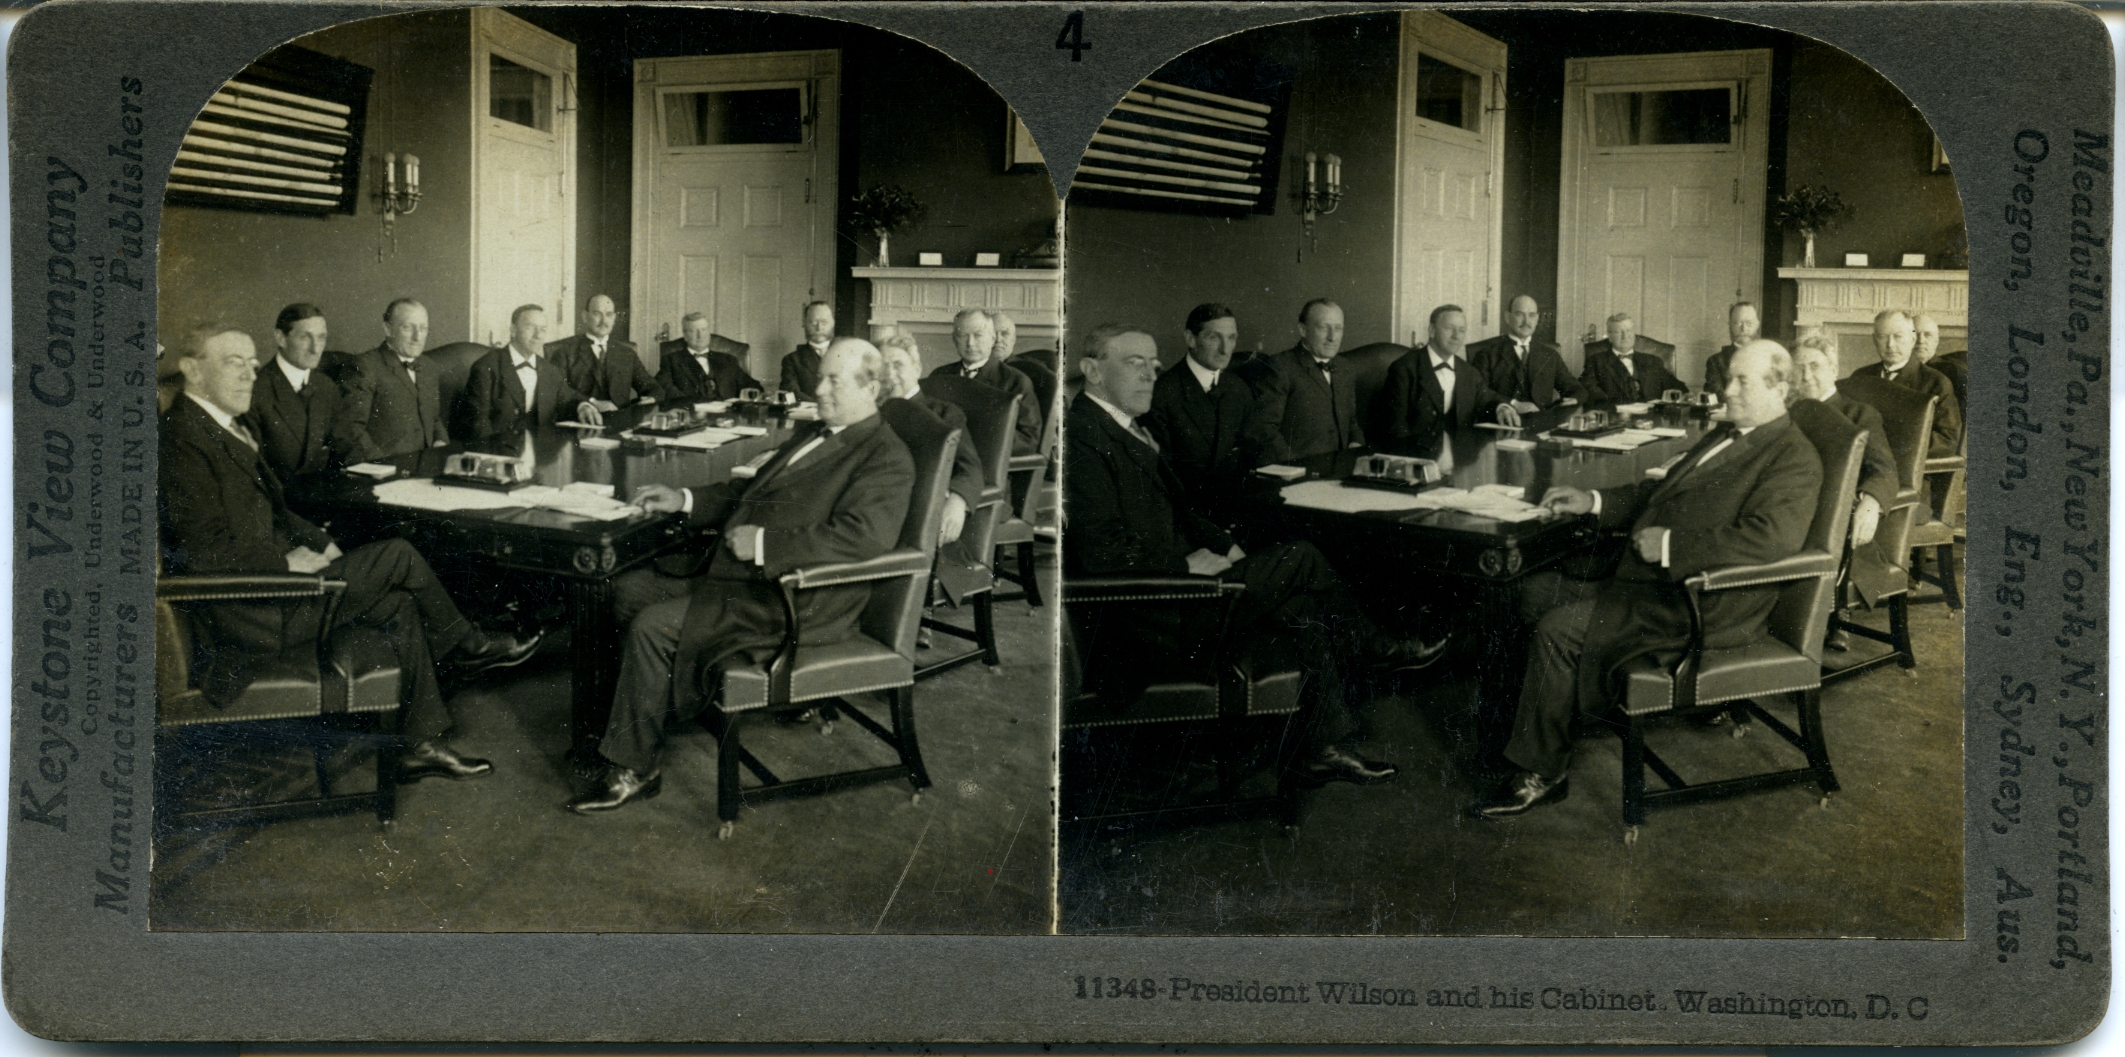 President Wilson and his Cabinet, Washington, D.C.